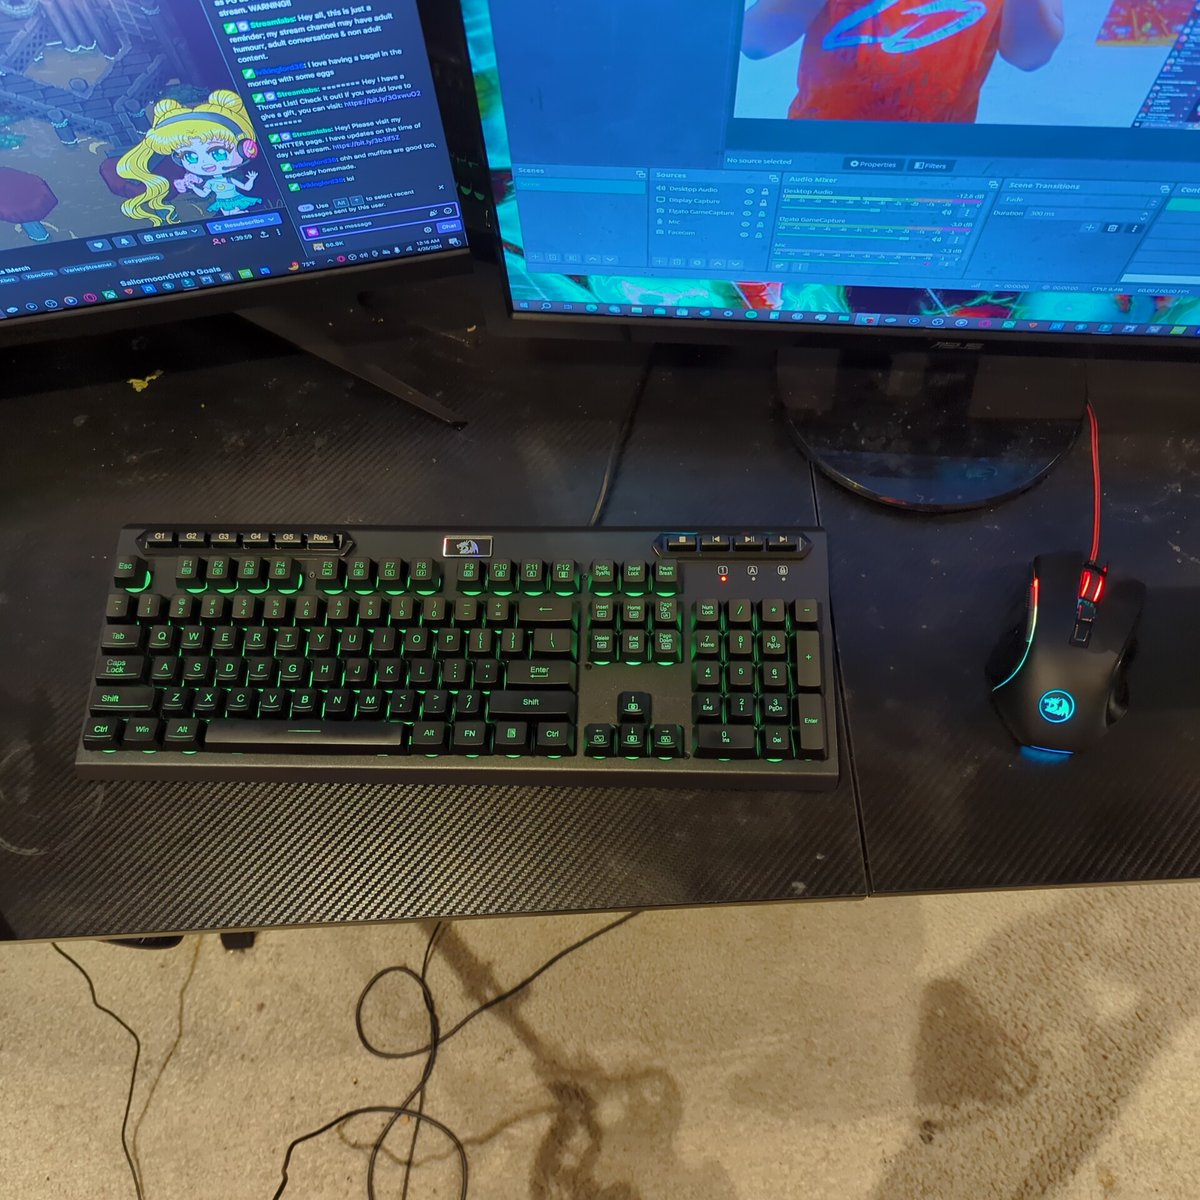 Got both @Redragonusa keyboard (Redragon K513) and mouse (Redragon M602) that I got from @amazon recently, as part of upgrading my setup. More upgrades coming soon..... #JalenTheGamer7 #JTG7 #youtubegaming #contentcreators #KickStreamer #TwitchStreamer